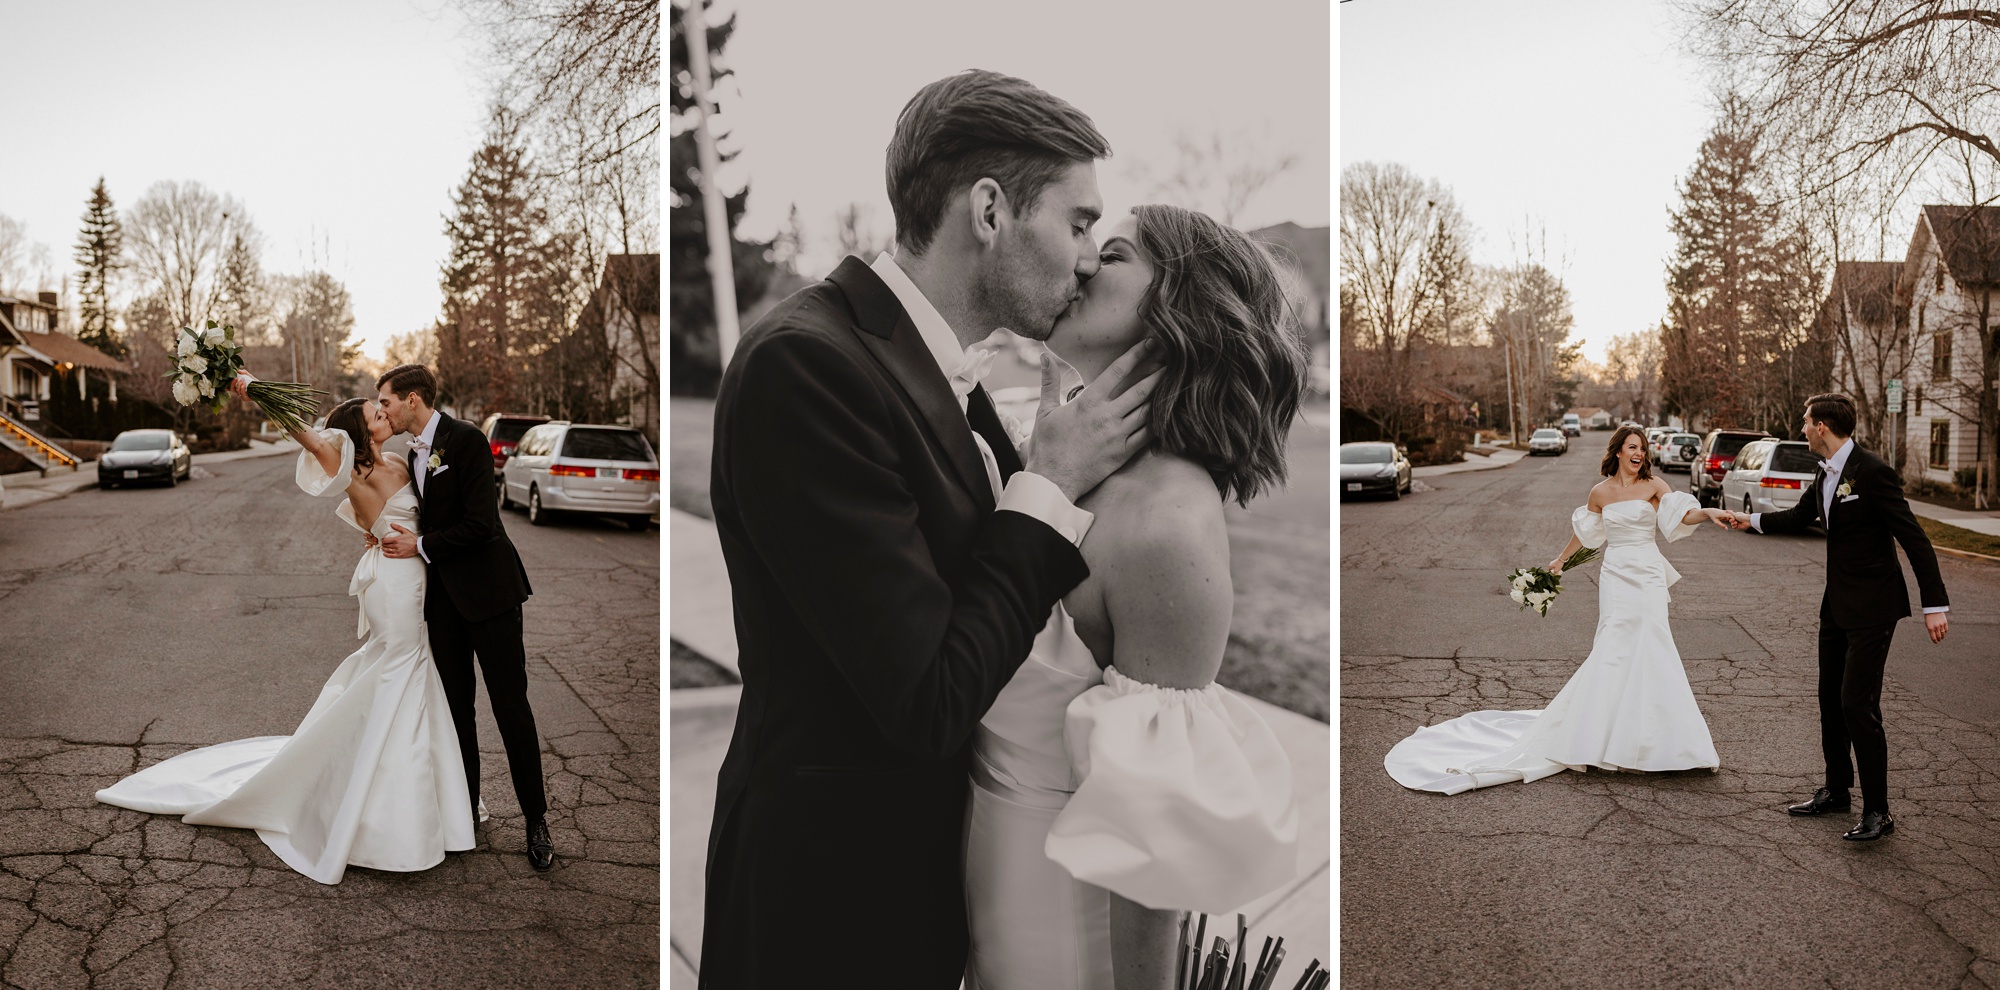 sunriver wedding winter central oregon bend downtown classy timeless